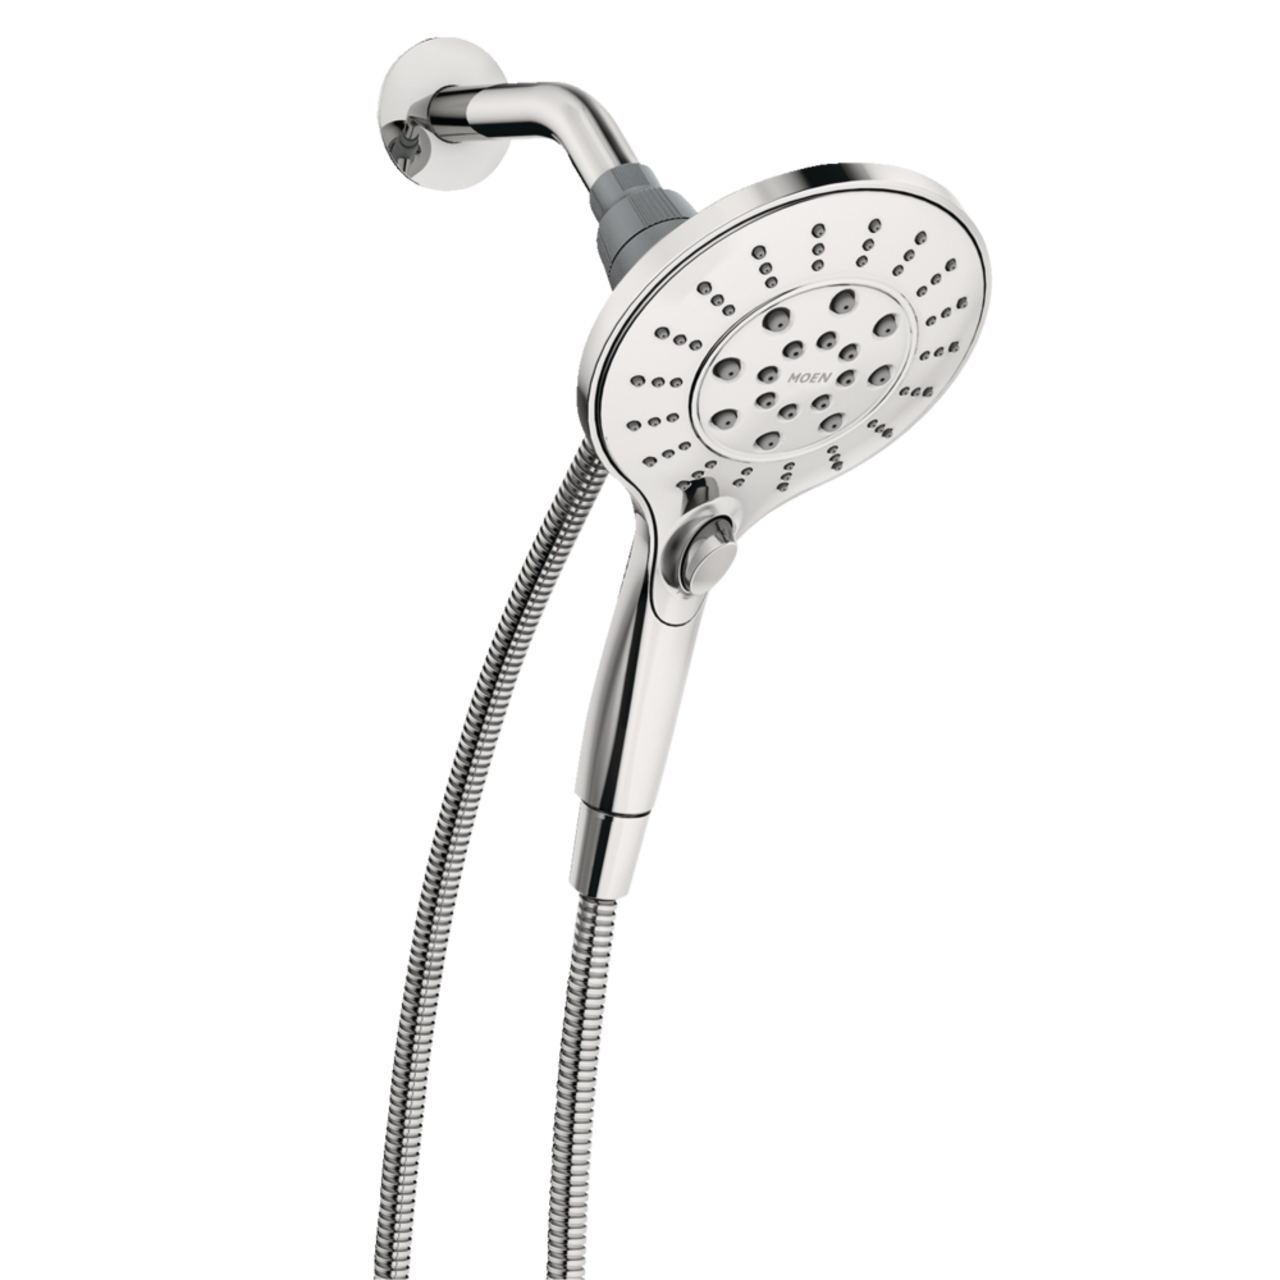 https://media-www.canadiantire.ca/product/fixing/plumbing/faucets-fixtures/0632432/moen-6-setting-chrome-handheld-showerhead-5a8768ec-5e03-4bab-bbfa-963c53cbbb12.png?imdensity=1&imwidth=640&impolicy=mZoom